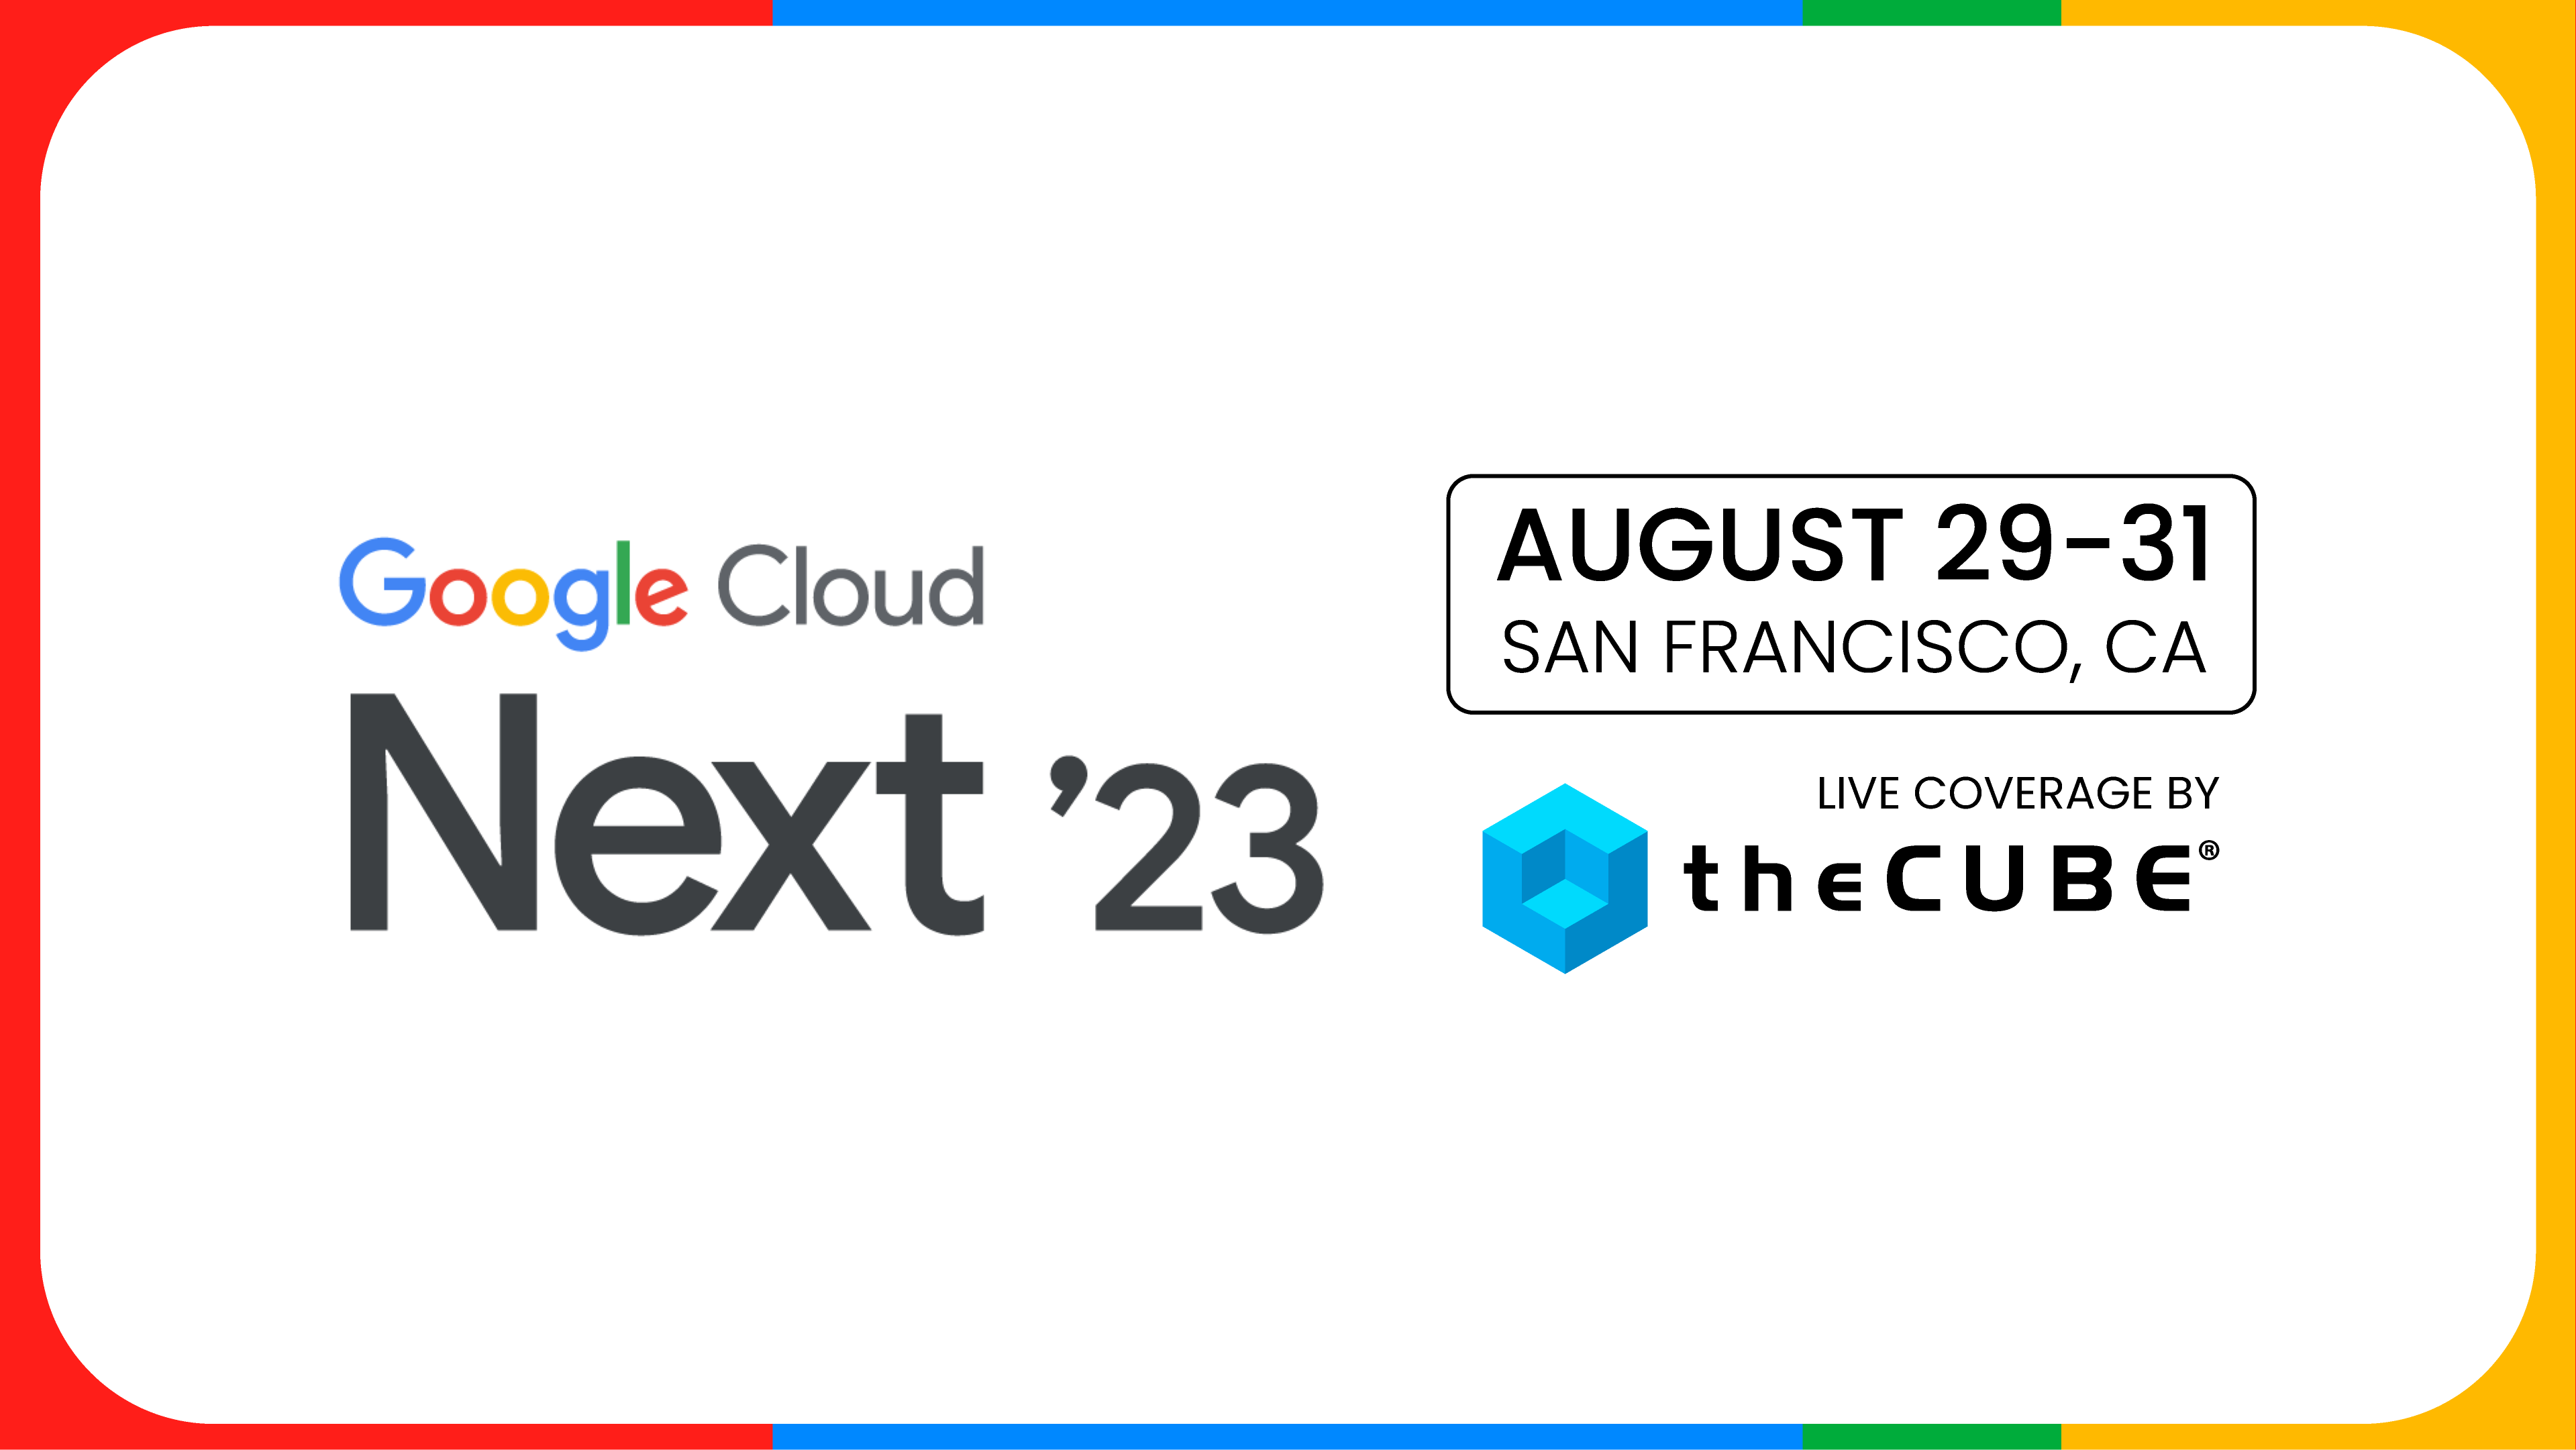 What to expect during Google Cloud Next: Join theCUBE August 29-31